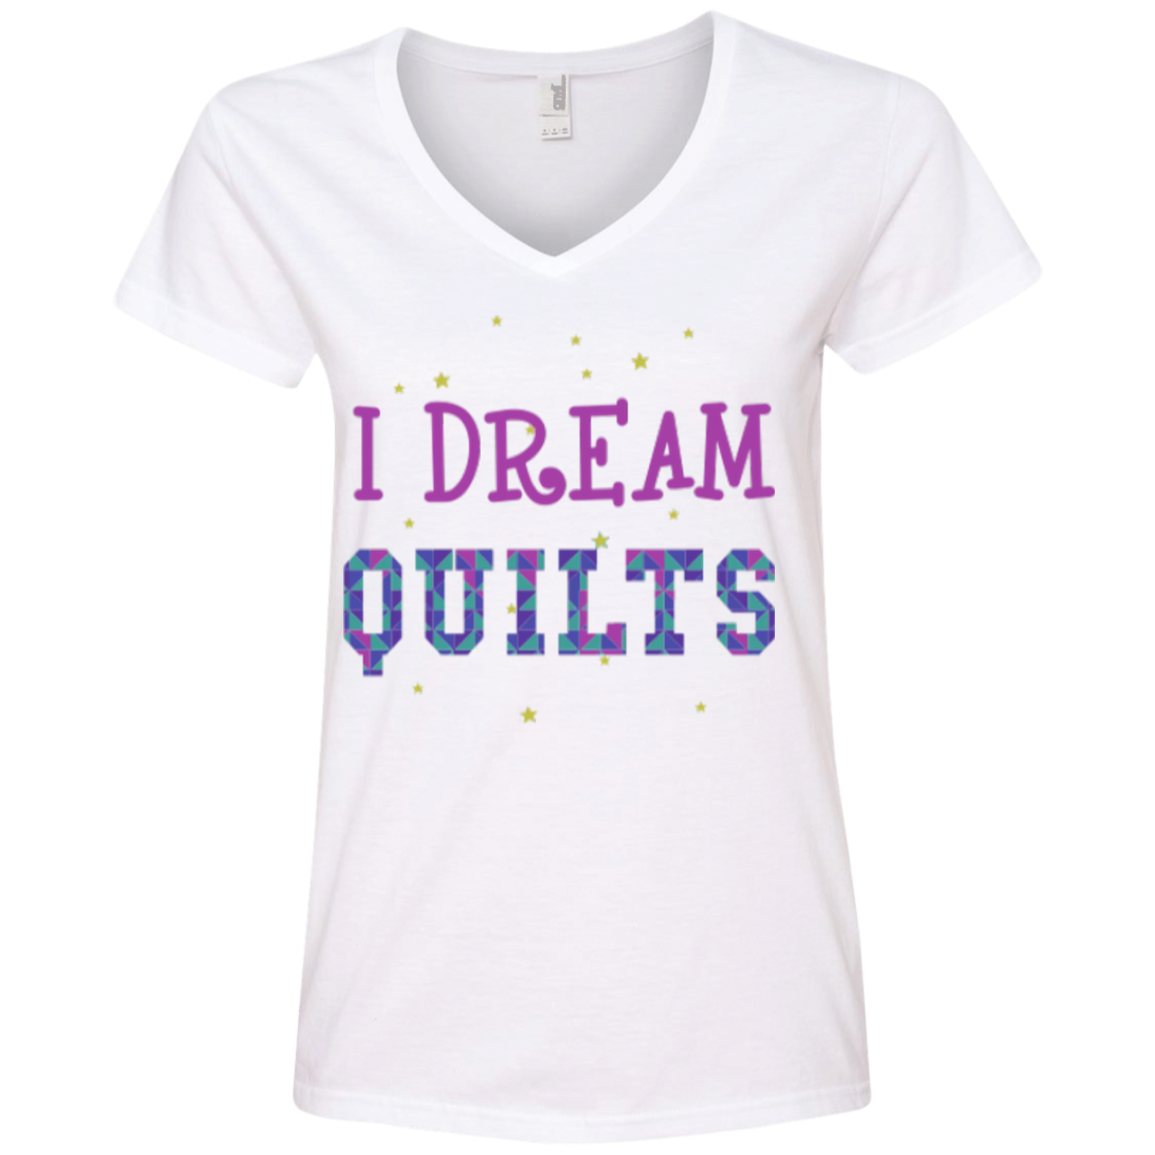 I Dream Quilts Ladies V-neck Tee - Crafter4Life - 3